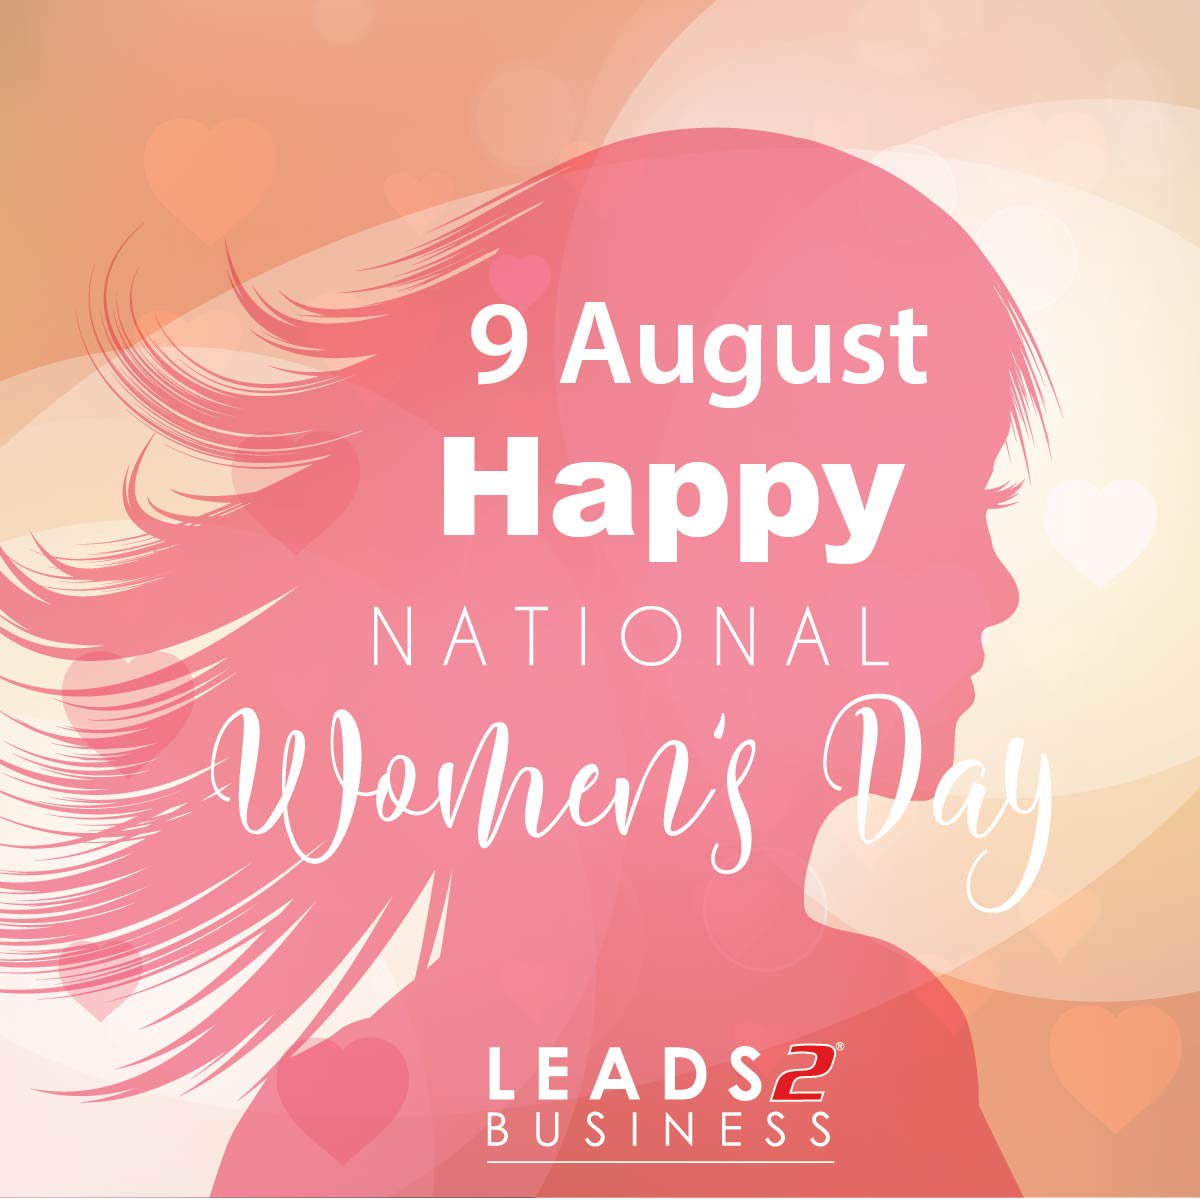 Leads 2 Business Today Is National Women S Day 18 Share To Celebrate The Women In Your Life Today